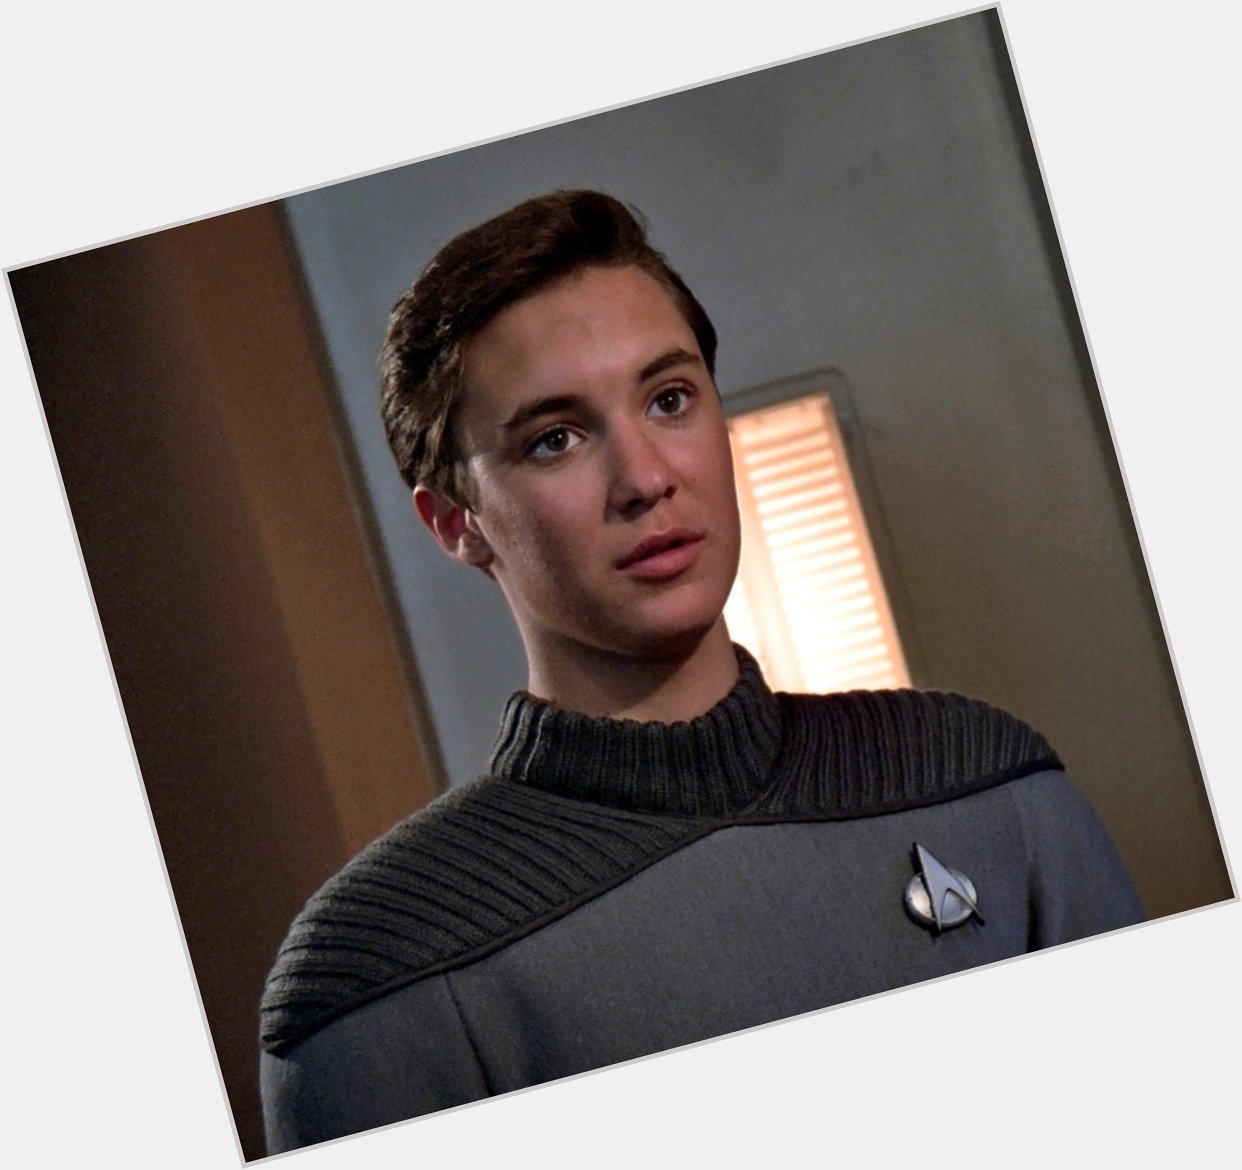 Happy birthday to Wil Wheaton aka my Star Trek crush! I hope we get to see more Wesley in Picard!  